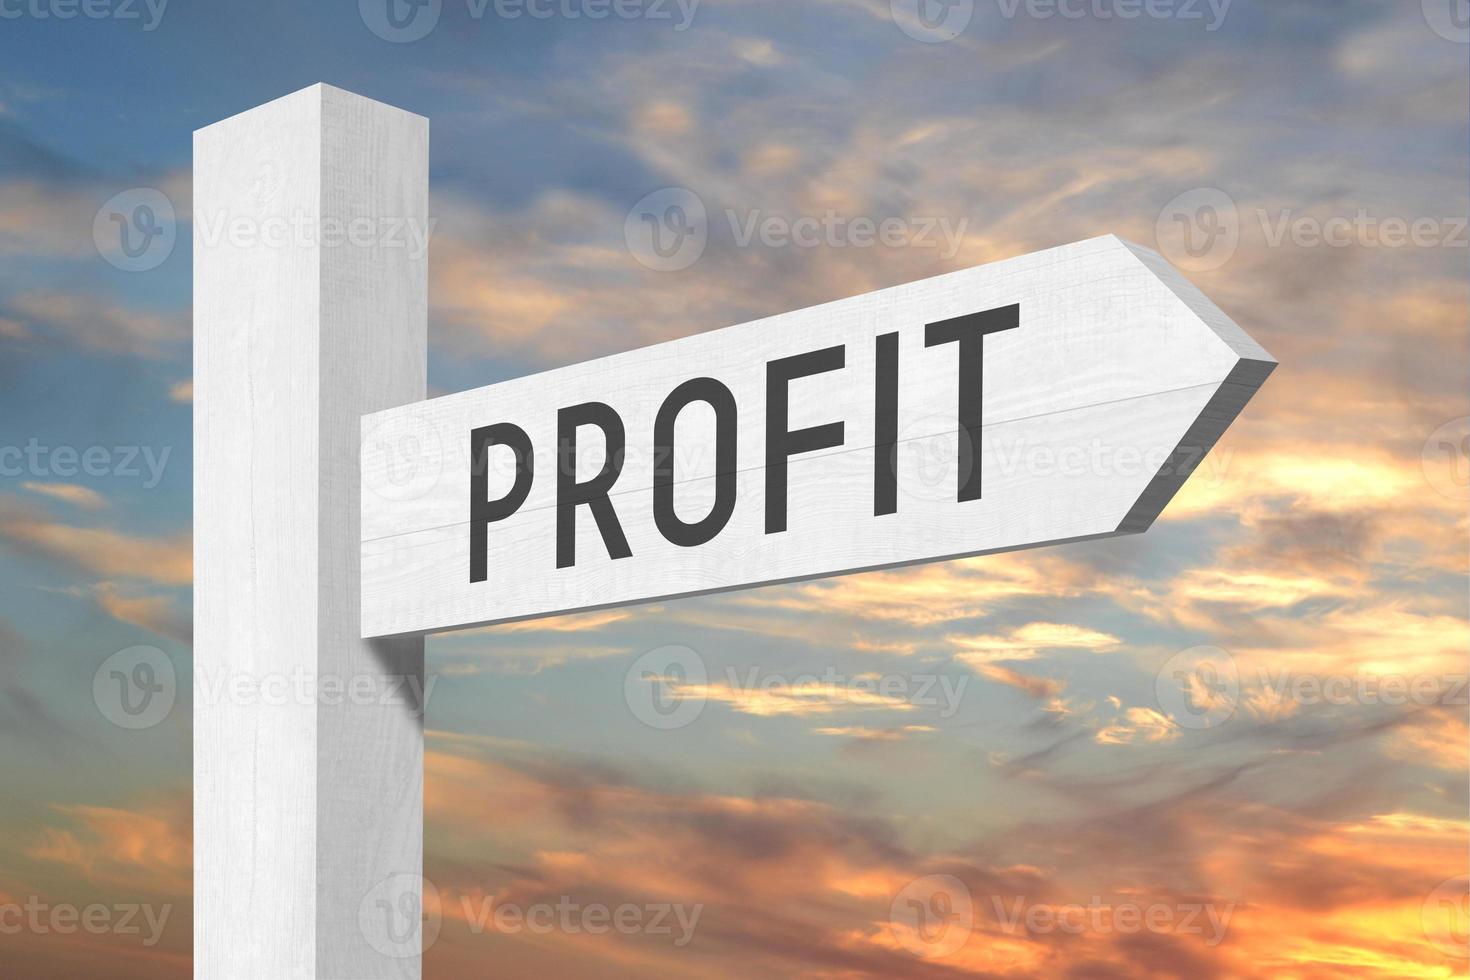 Profit - White Wooden Signpost with one Arrow and Sunset Sky in Background photo